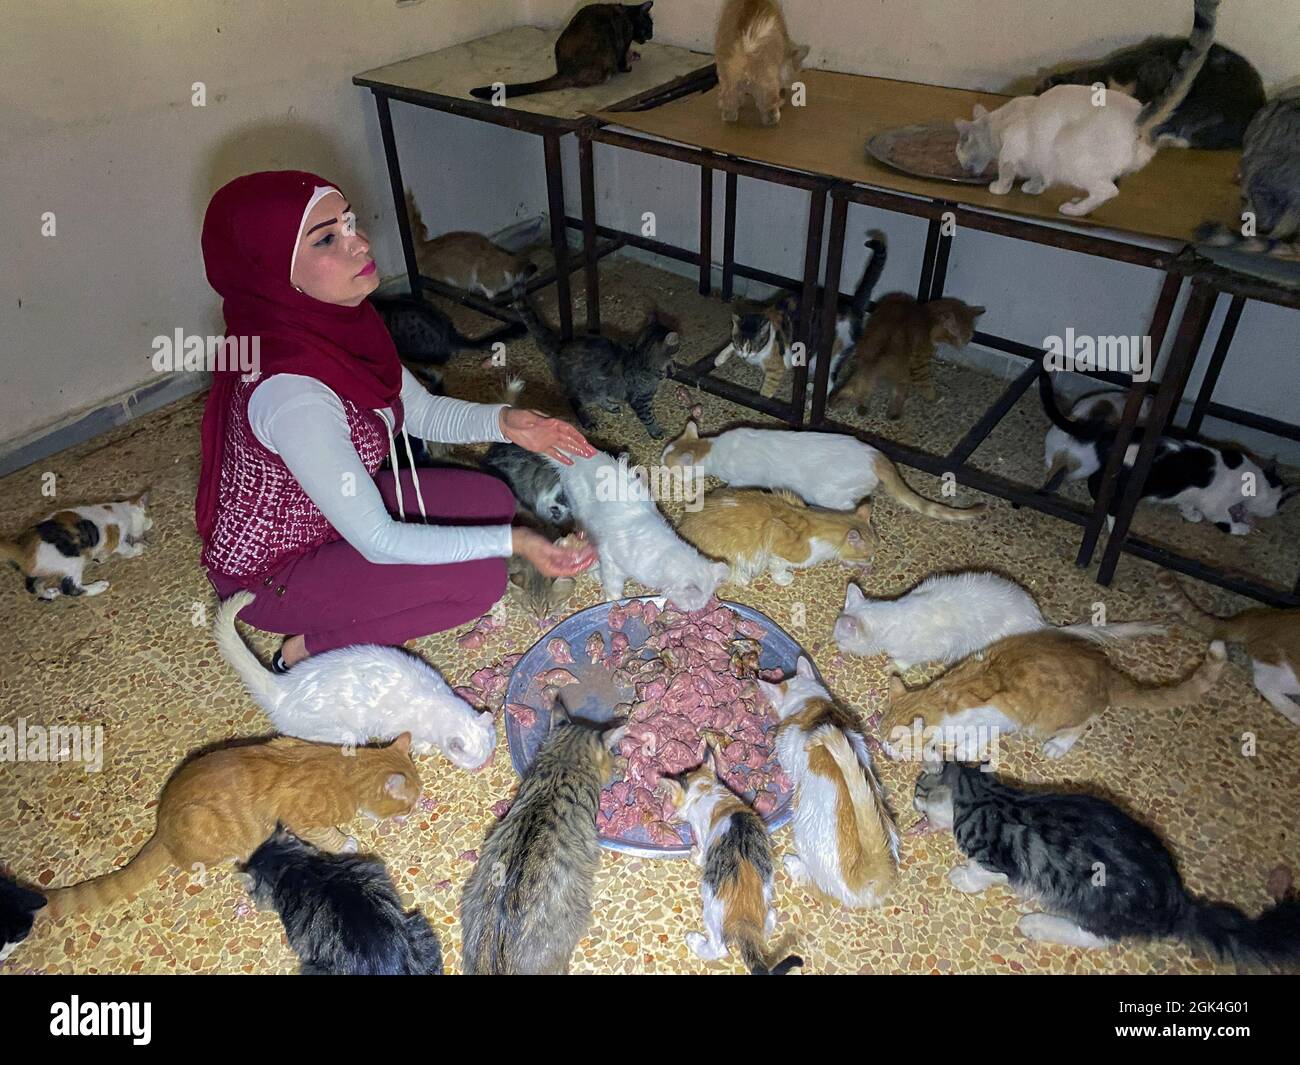 Alaa Abu Draa, an animal lover who turned her house into a makeshift shelter for stray animals, feeds cats in Damascus, Syria, September 8, 2021. Picture taken September 8, 2021. REUTERS/Firas Makdesi Stock Photo